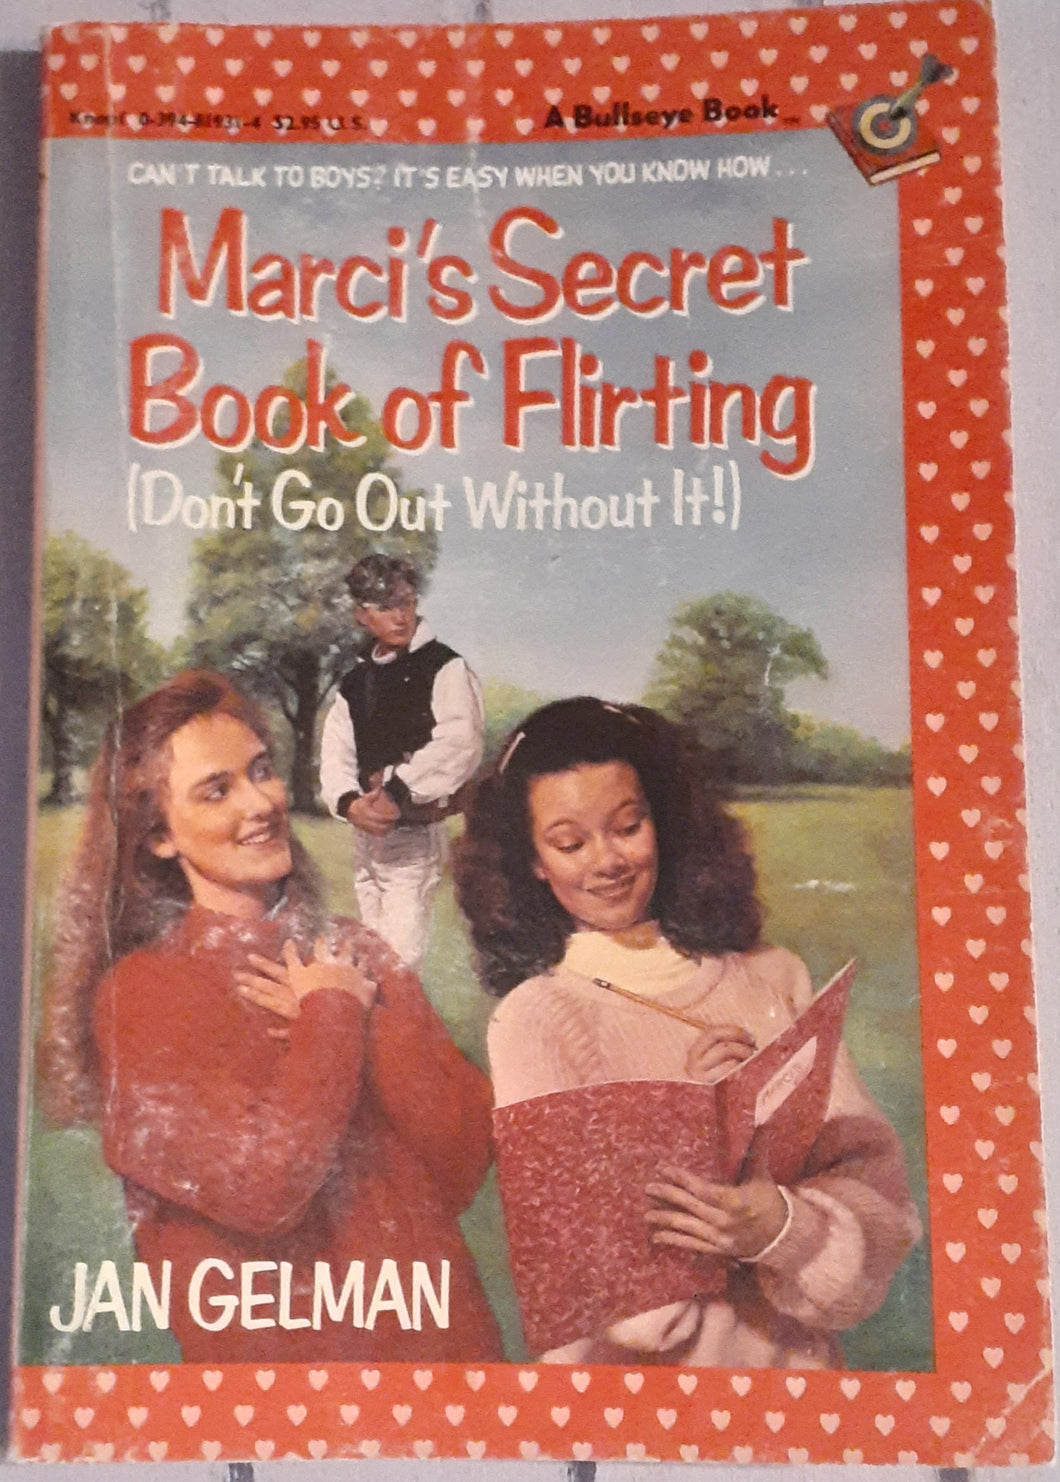 Marci's Secret Book of Flirting (Don't Go Out Without It!)